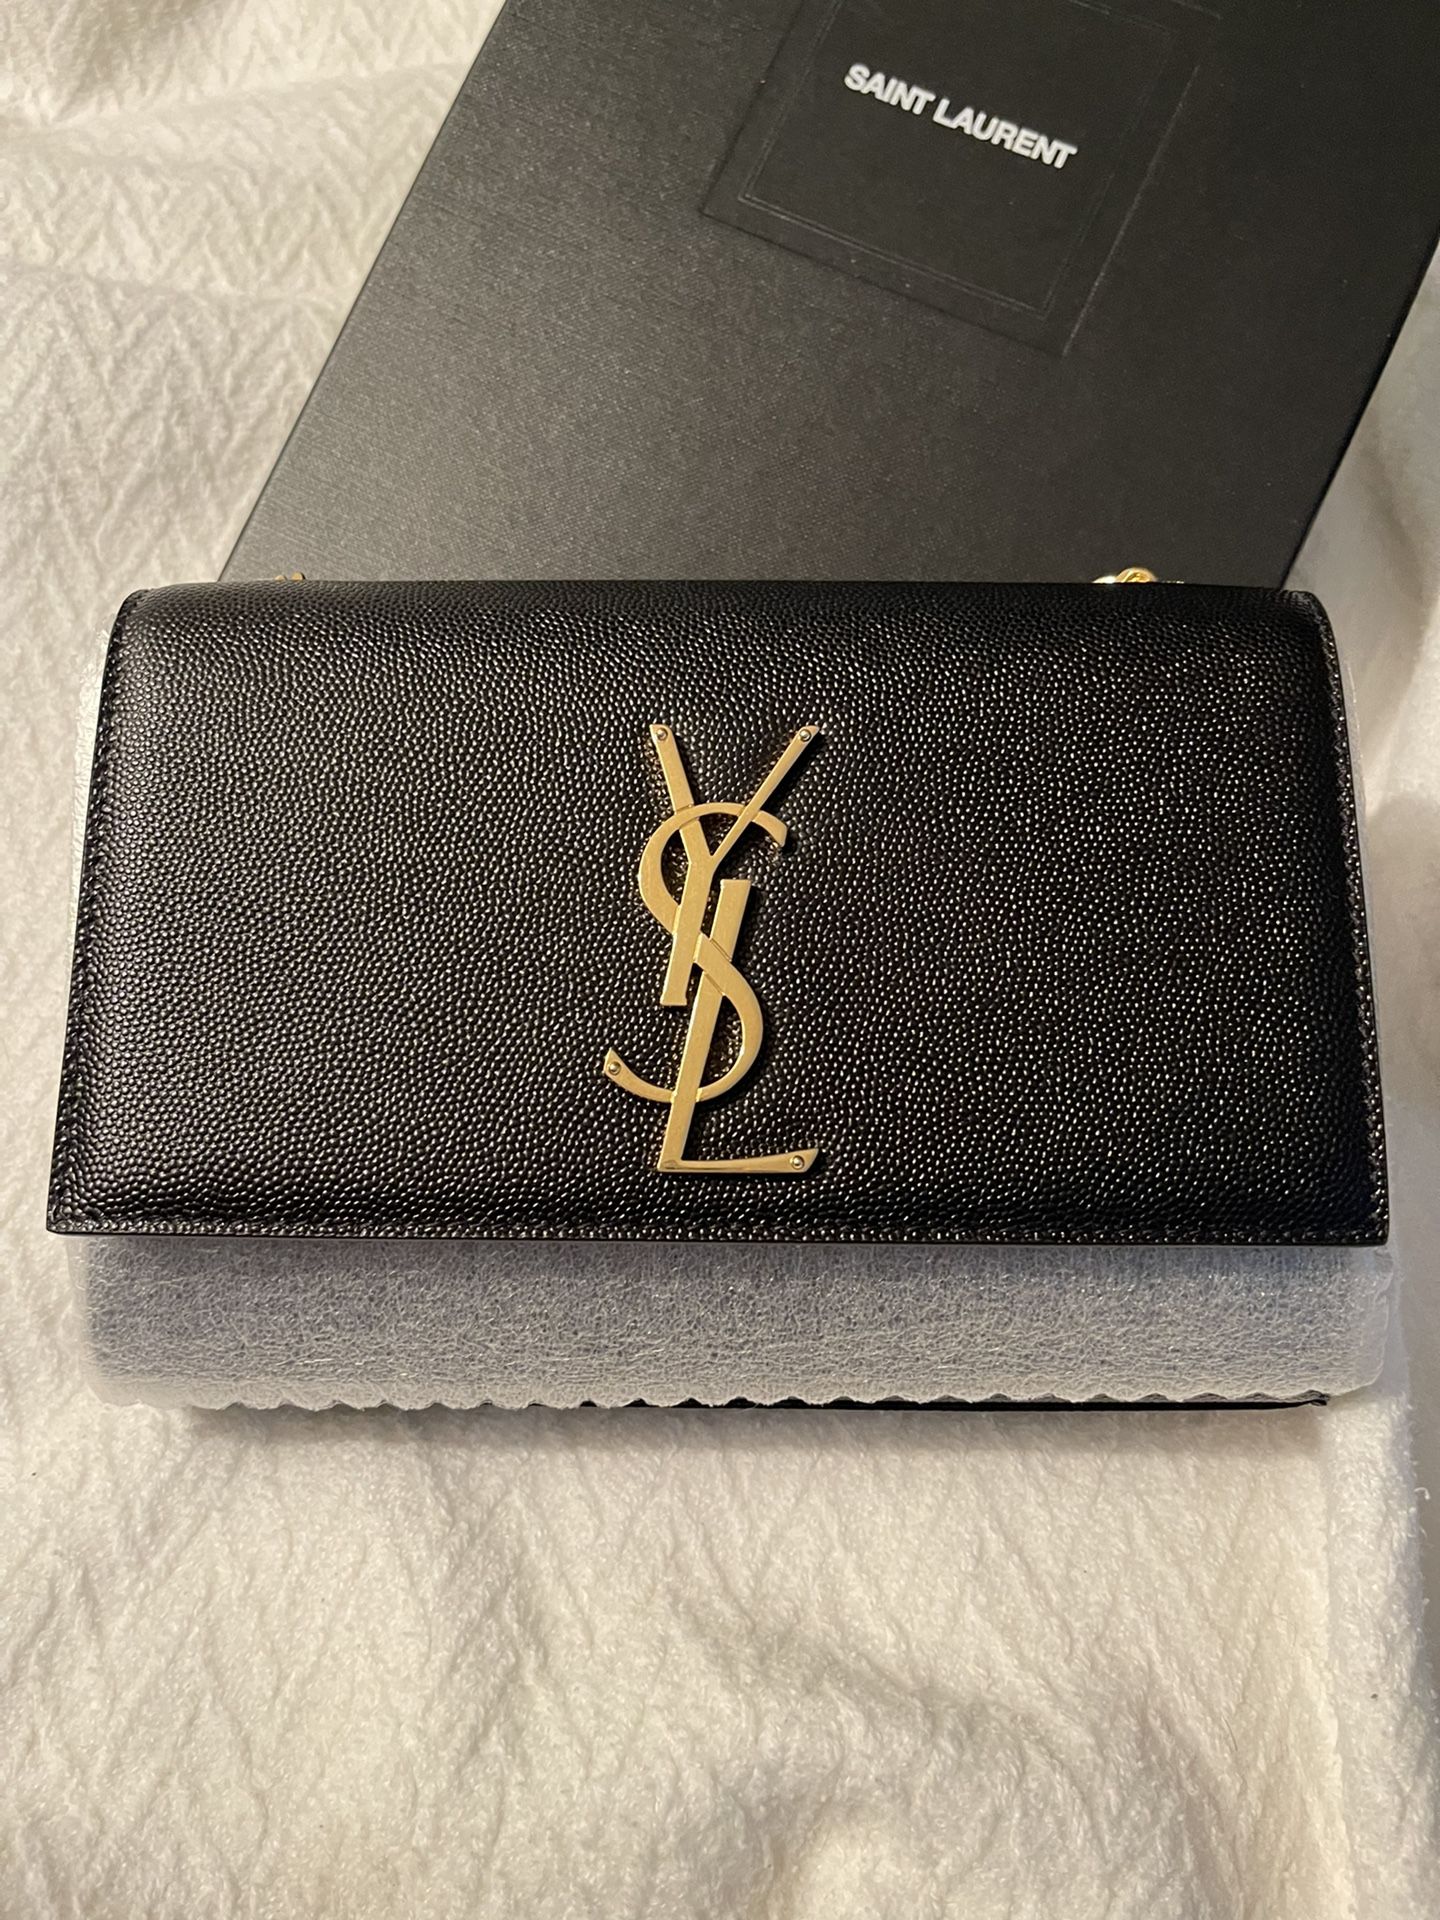 Ysl Wallet On Chain Dupe for Sale in The Bronx, NY - OfferUp